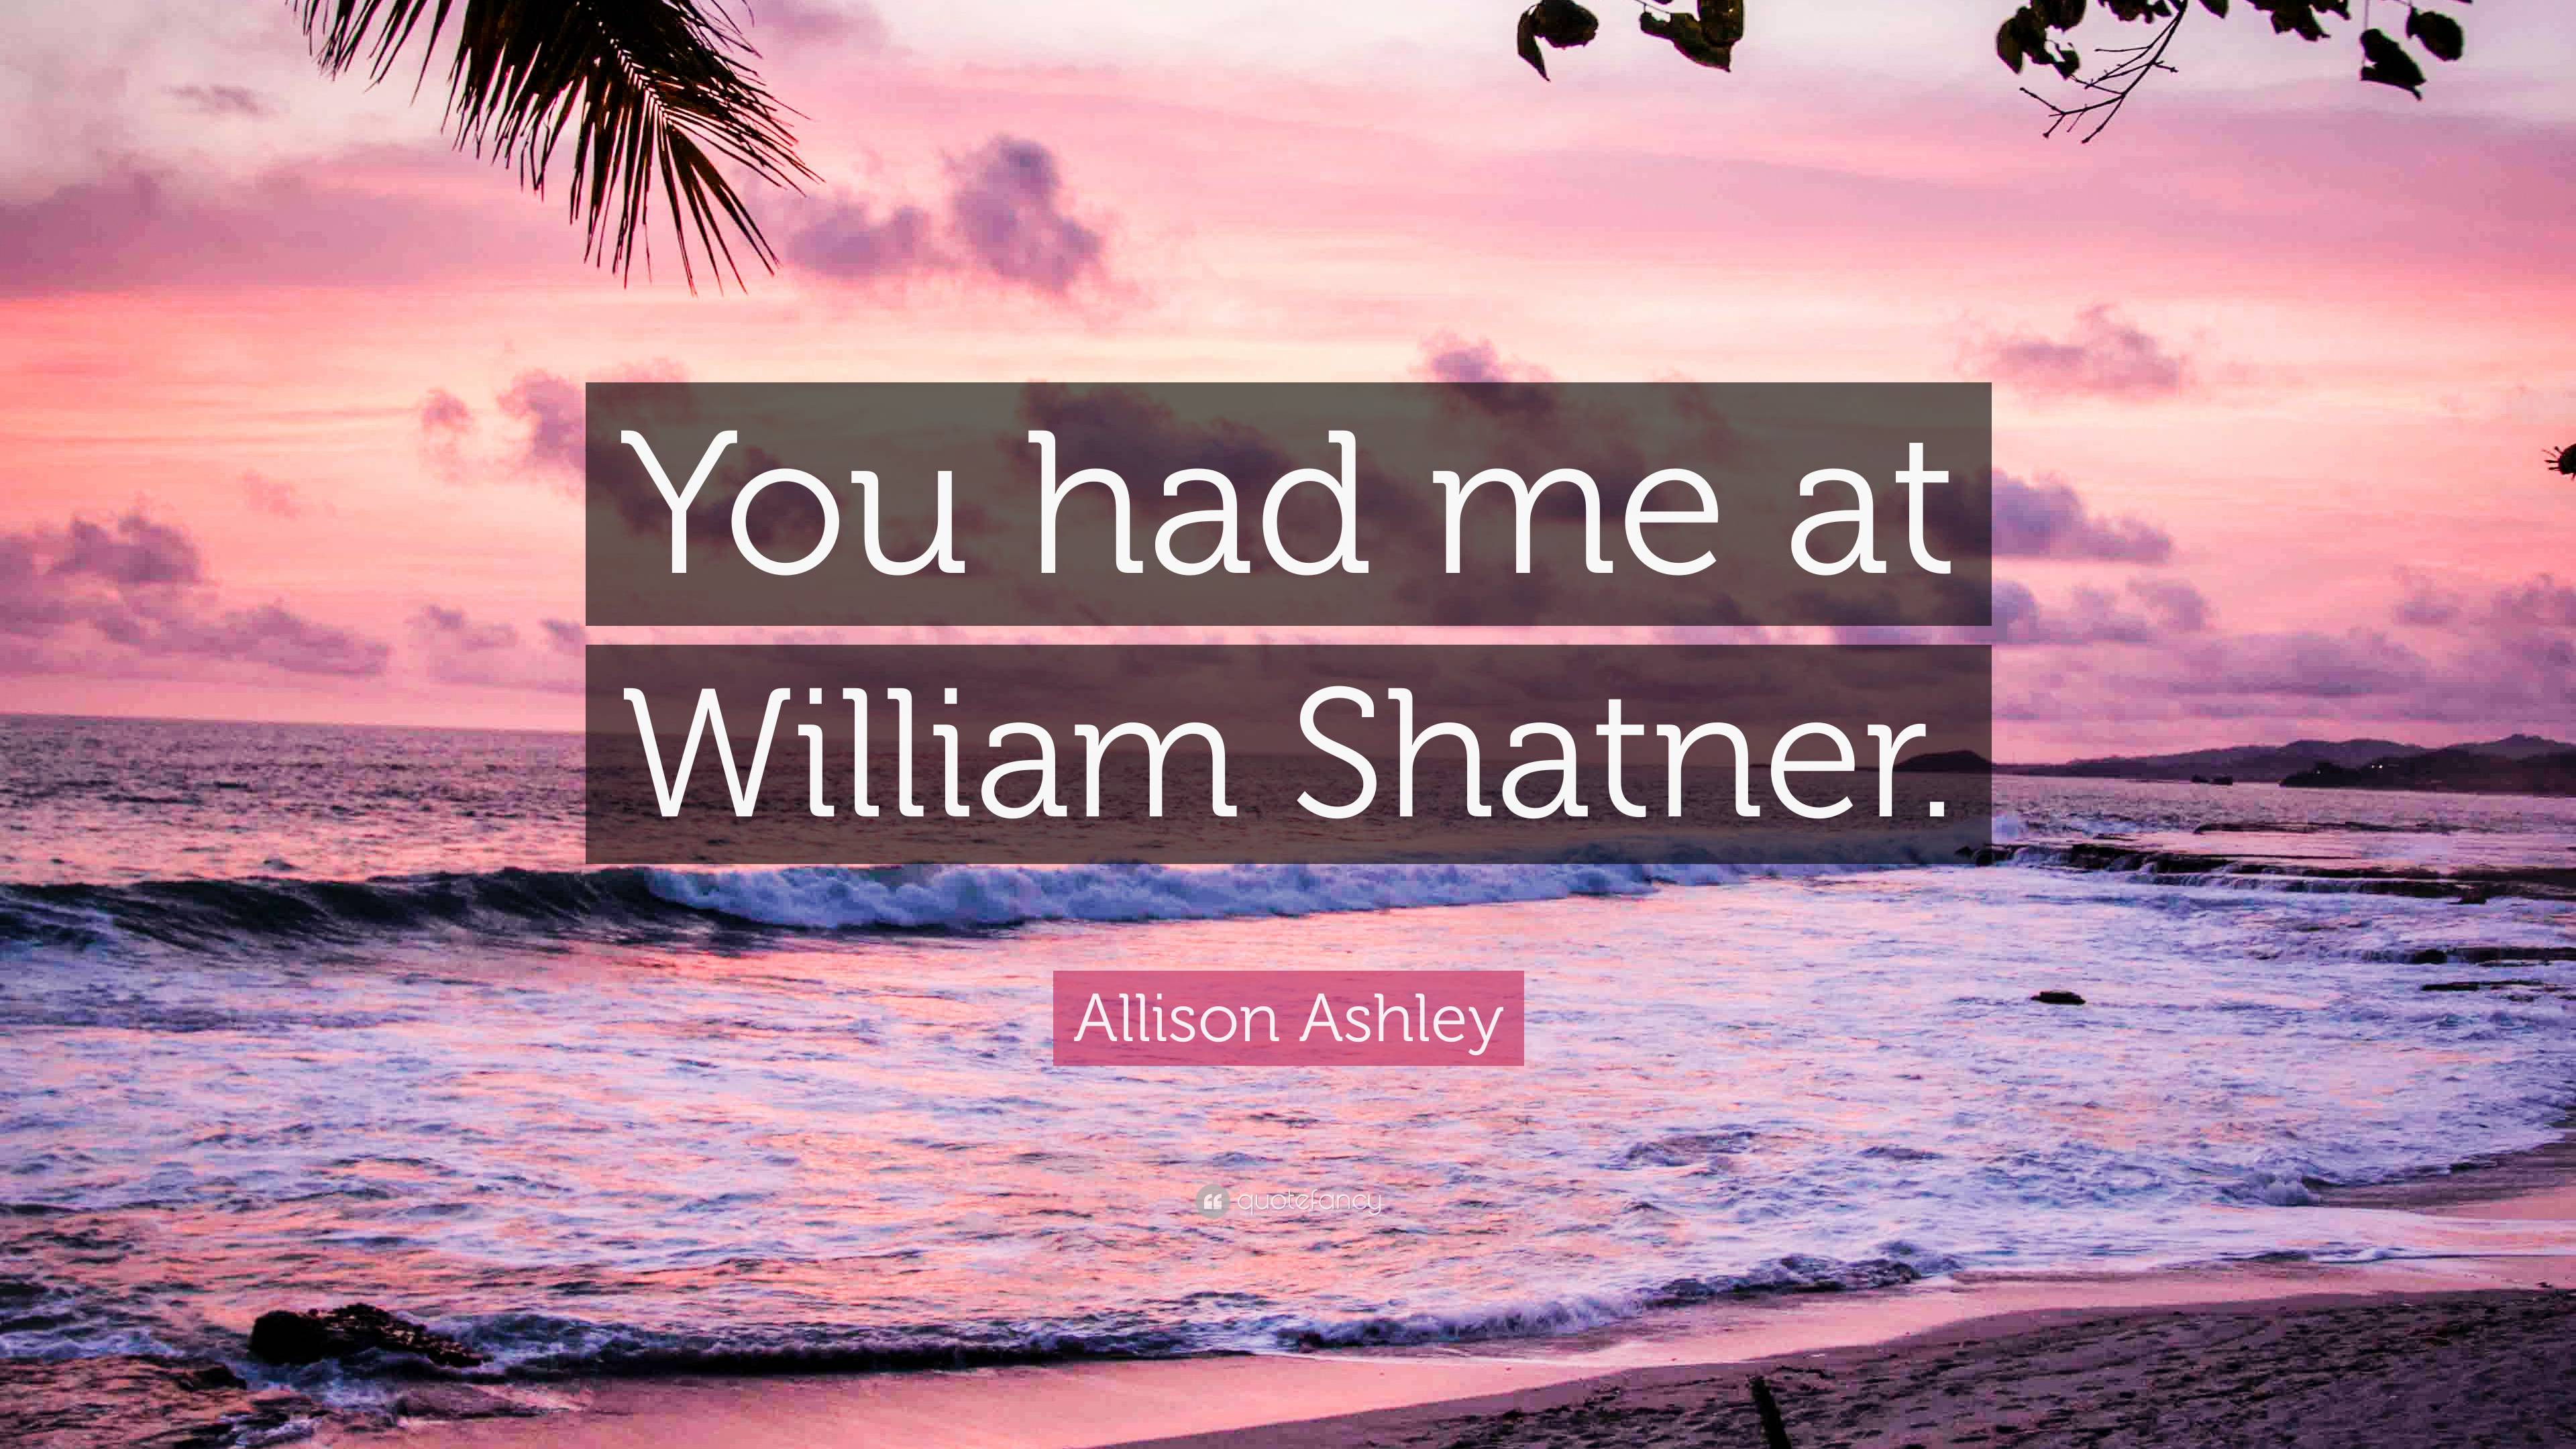 Allison Ashley Quote: “You had me at William Shatner.”